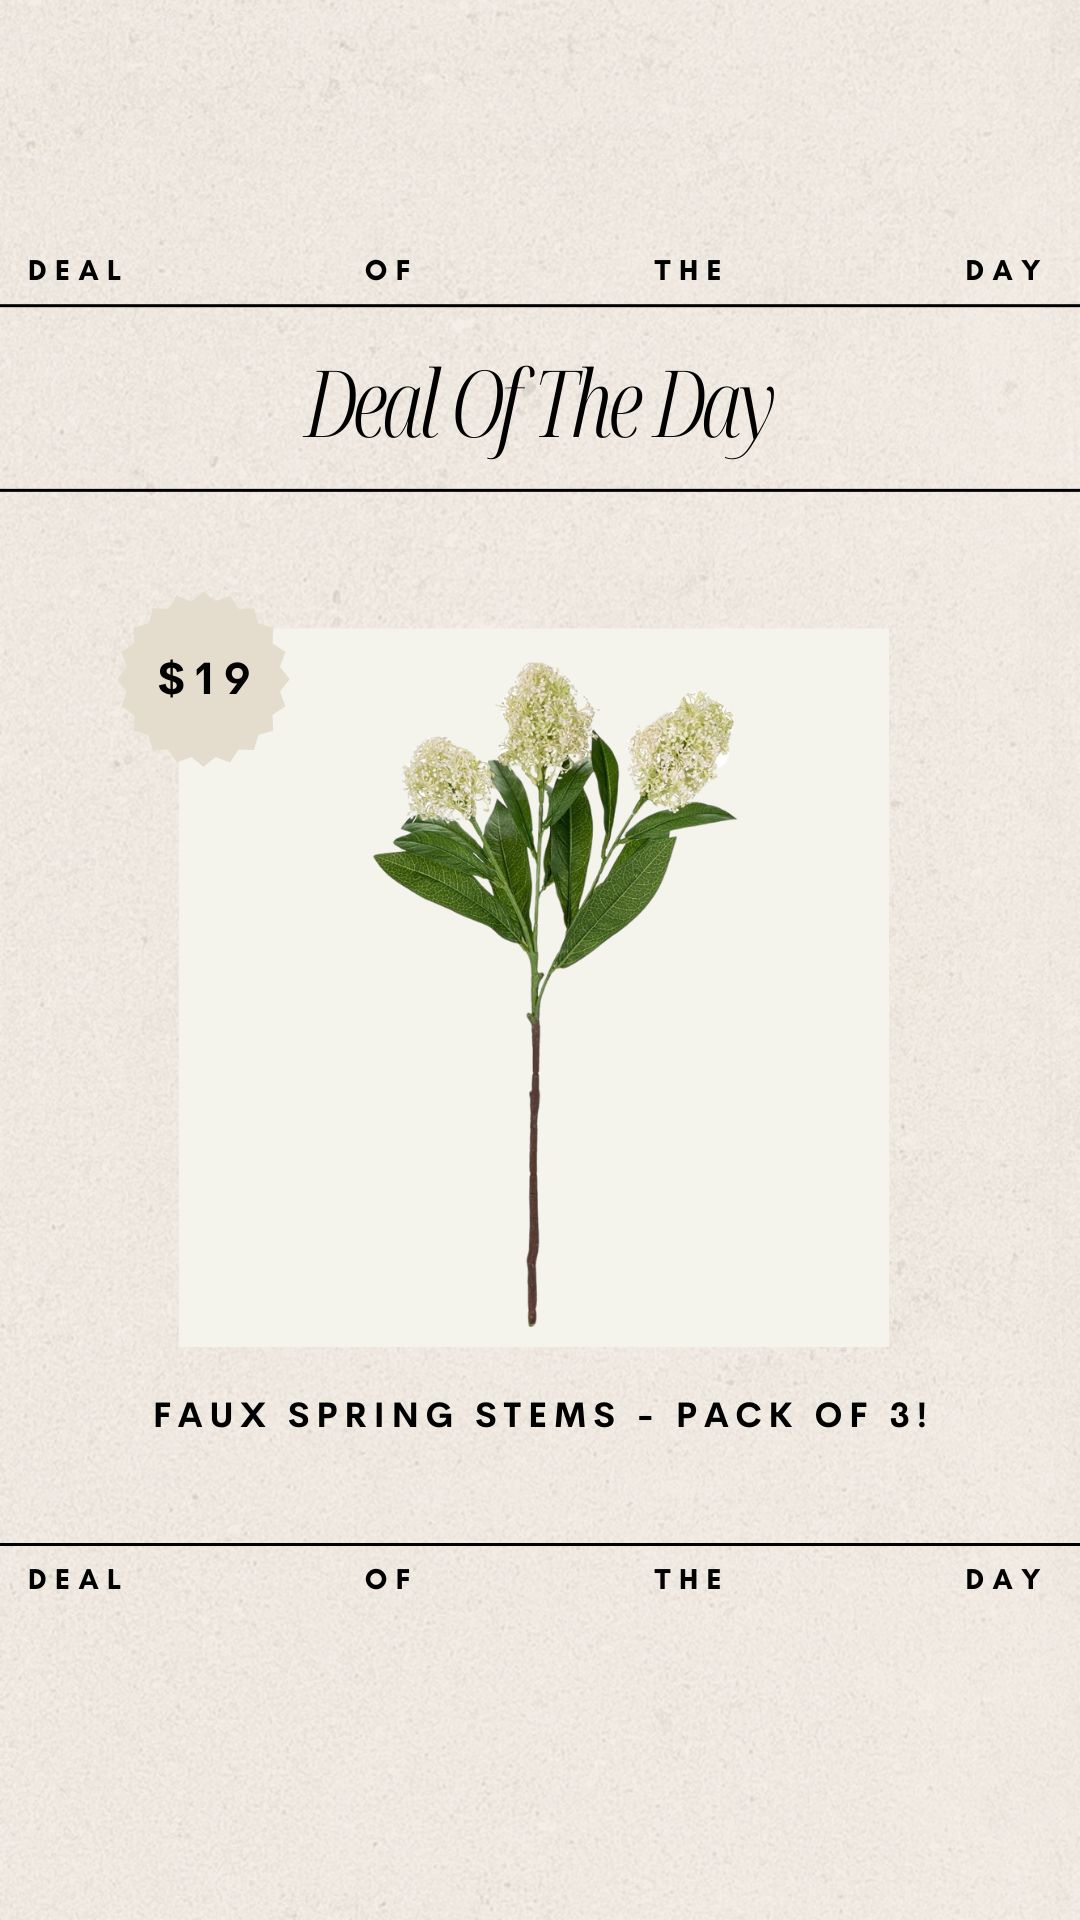 Deal of the Day - Amazon Faux Spring Stems  // Pack of 3 for only $19! | Amazon (US)